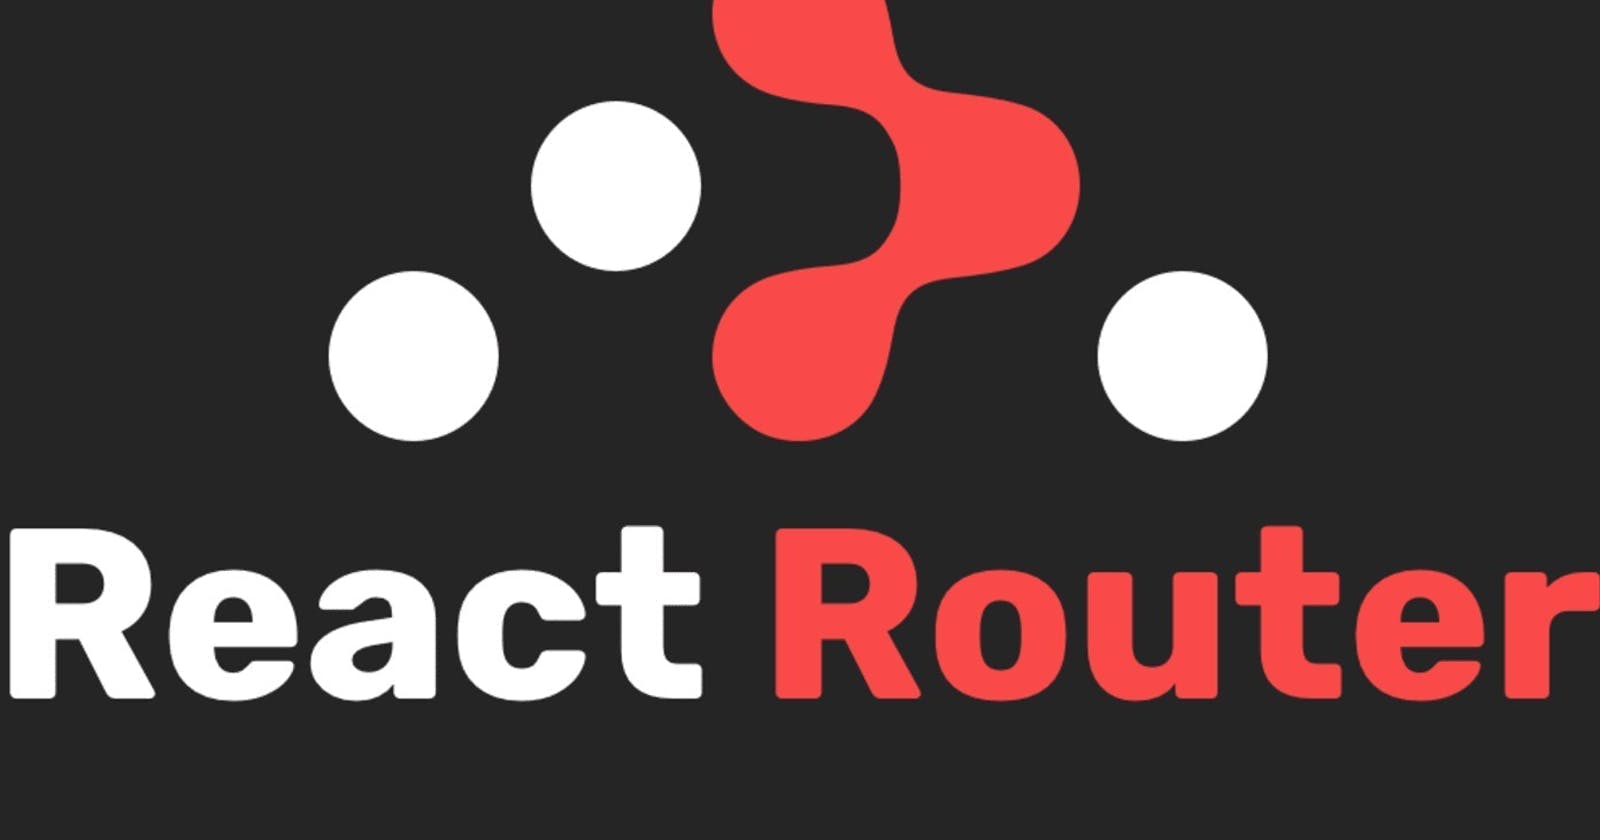 Getting quickly started with React Router